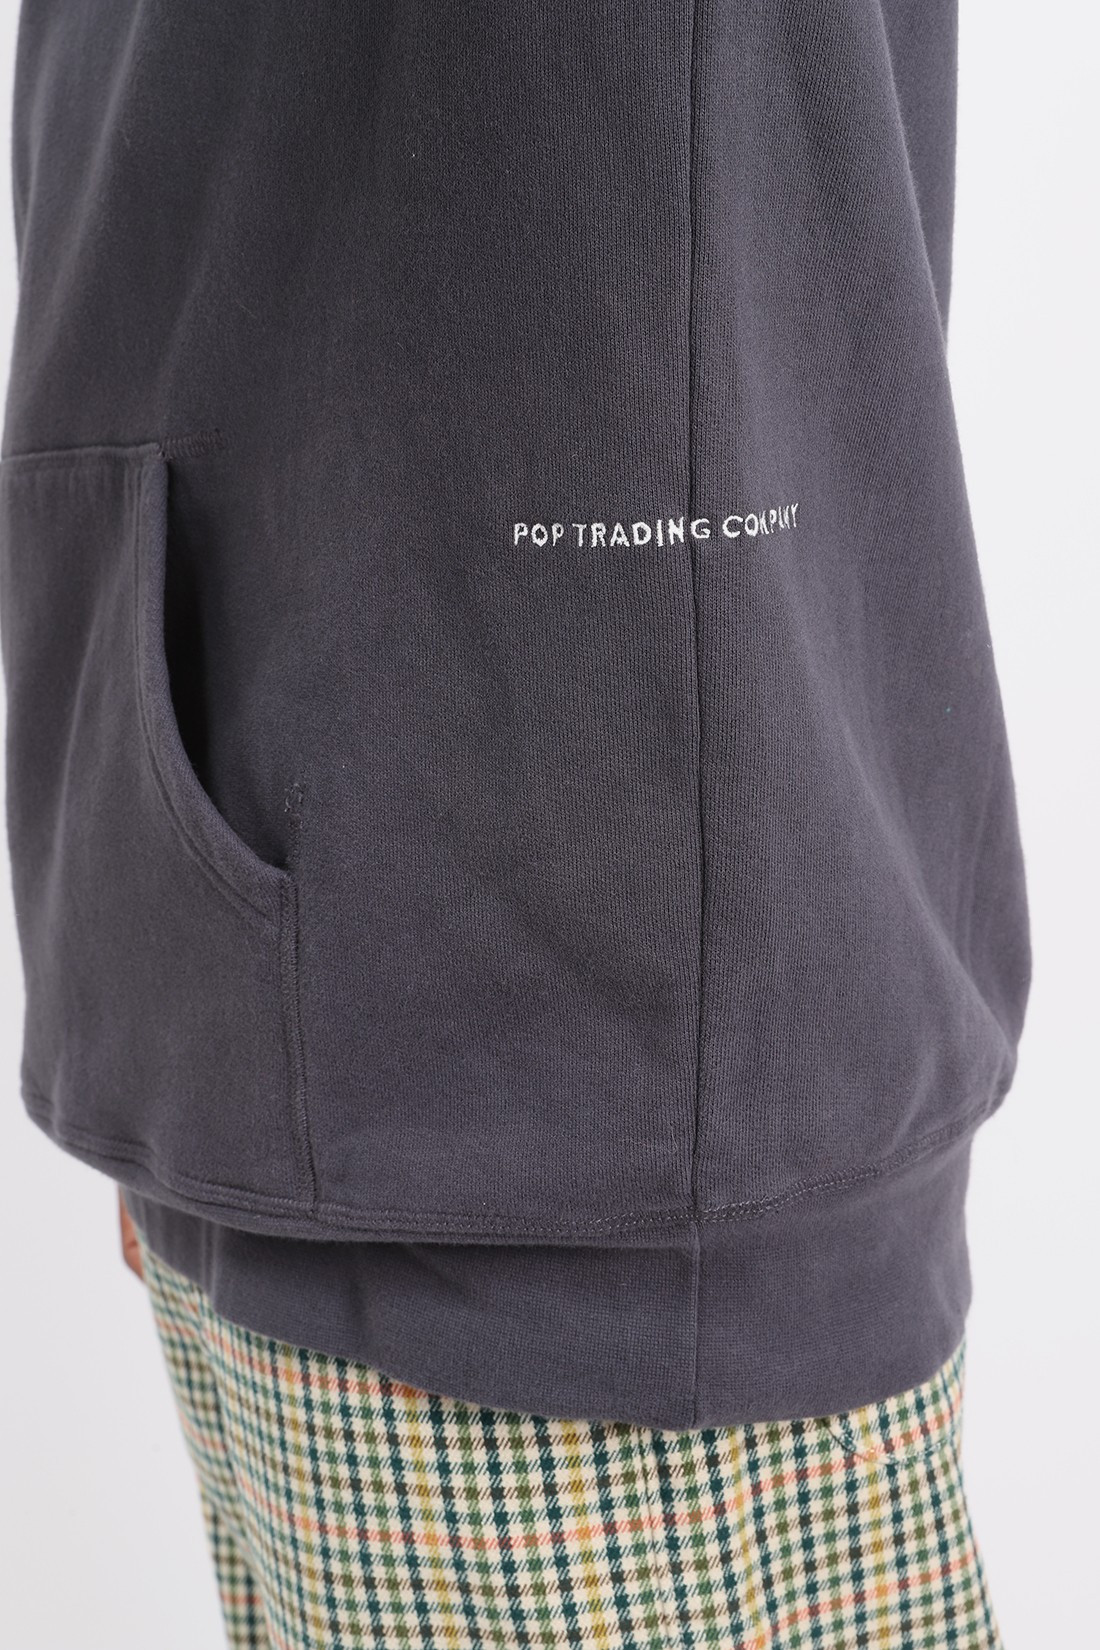 POP TRADING COMPANY / Arch hooded sweat Anthracite